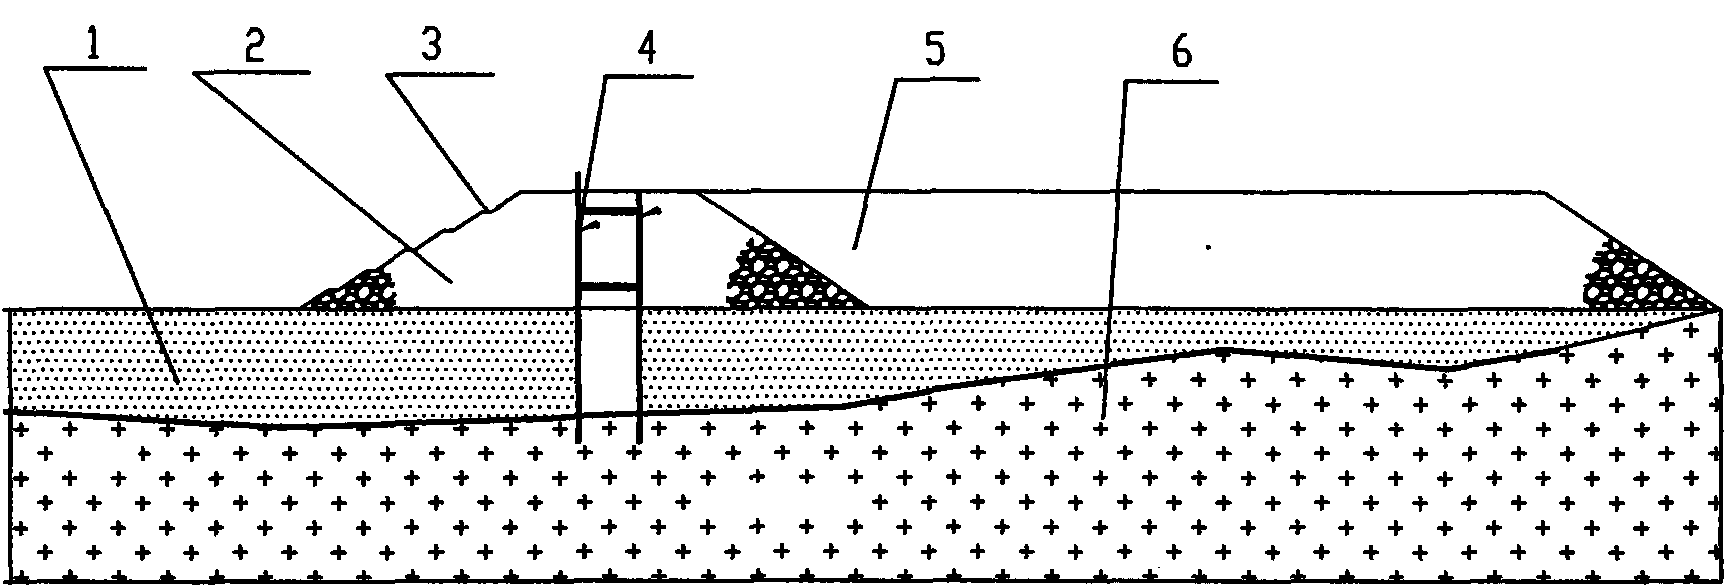 Method for building impermeable tailings dams with high scattered piles by waste rocks